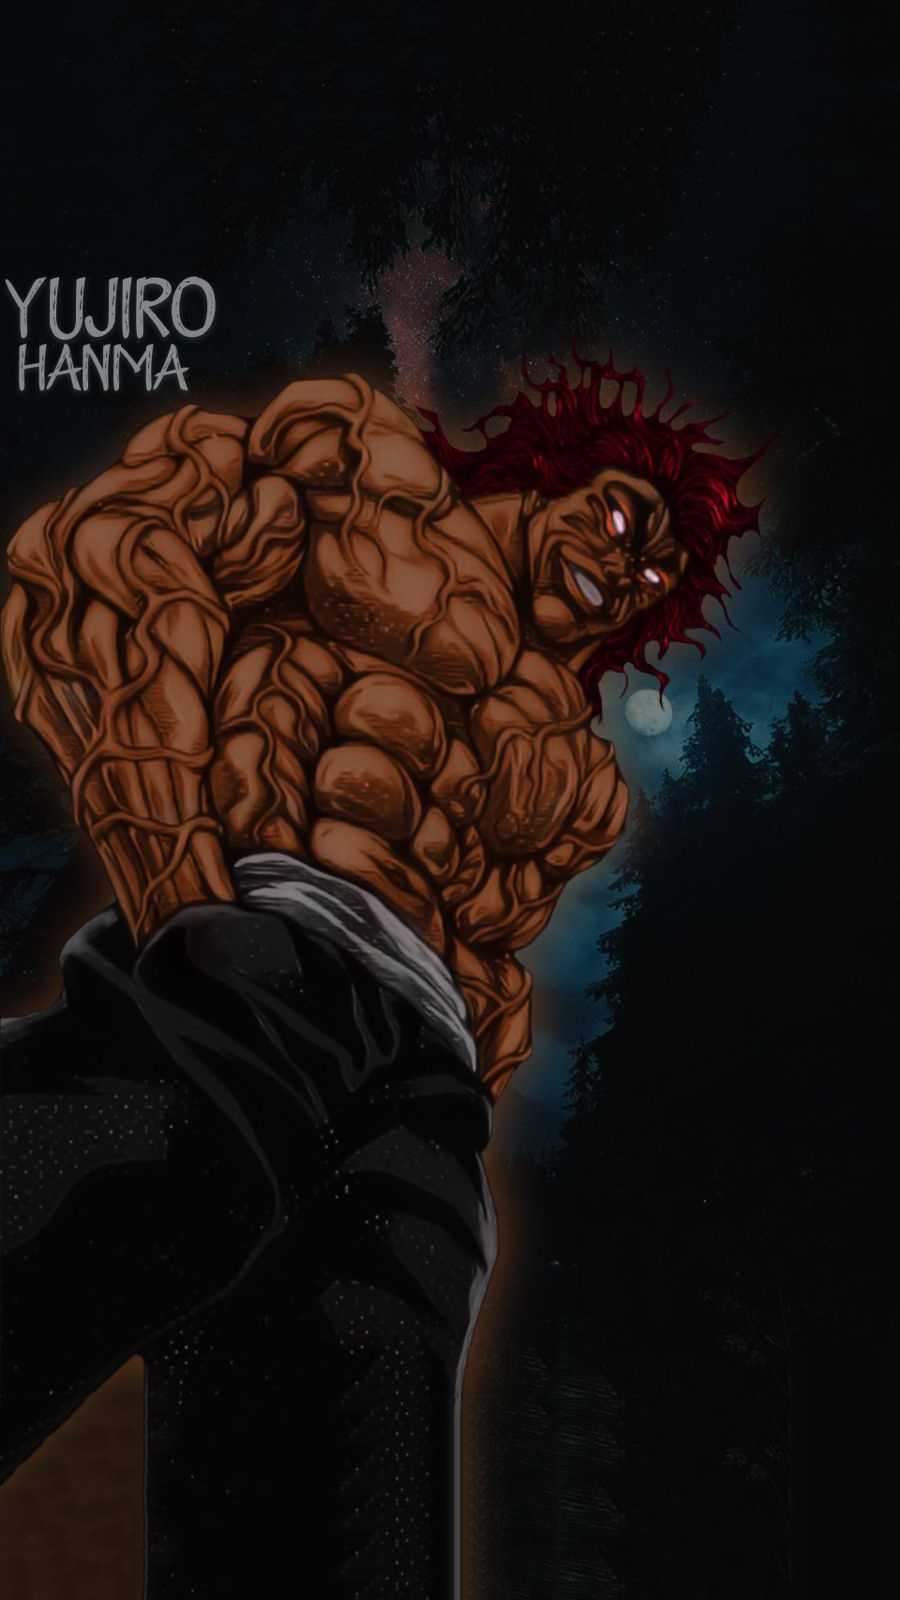 Baki Hanma Joins Street Fighter 6 in Official Crossover